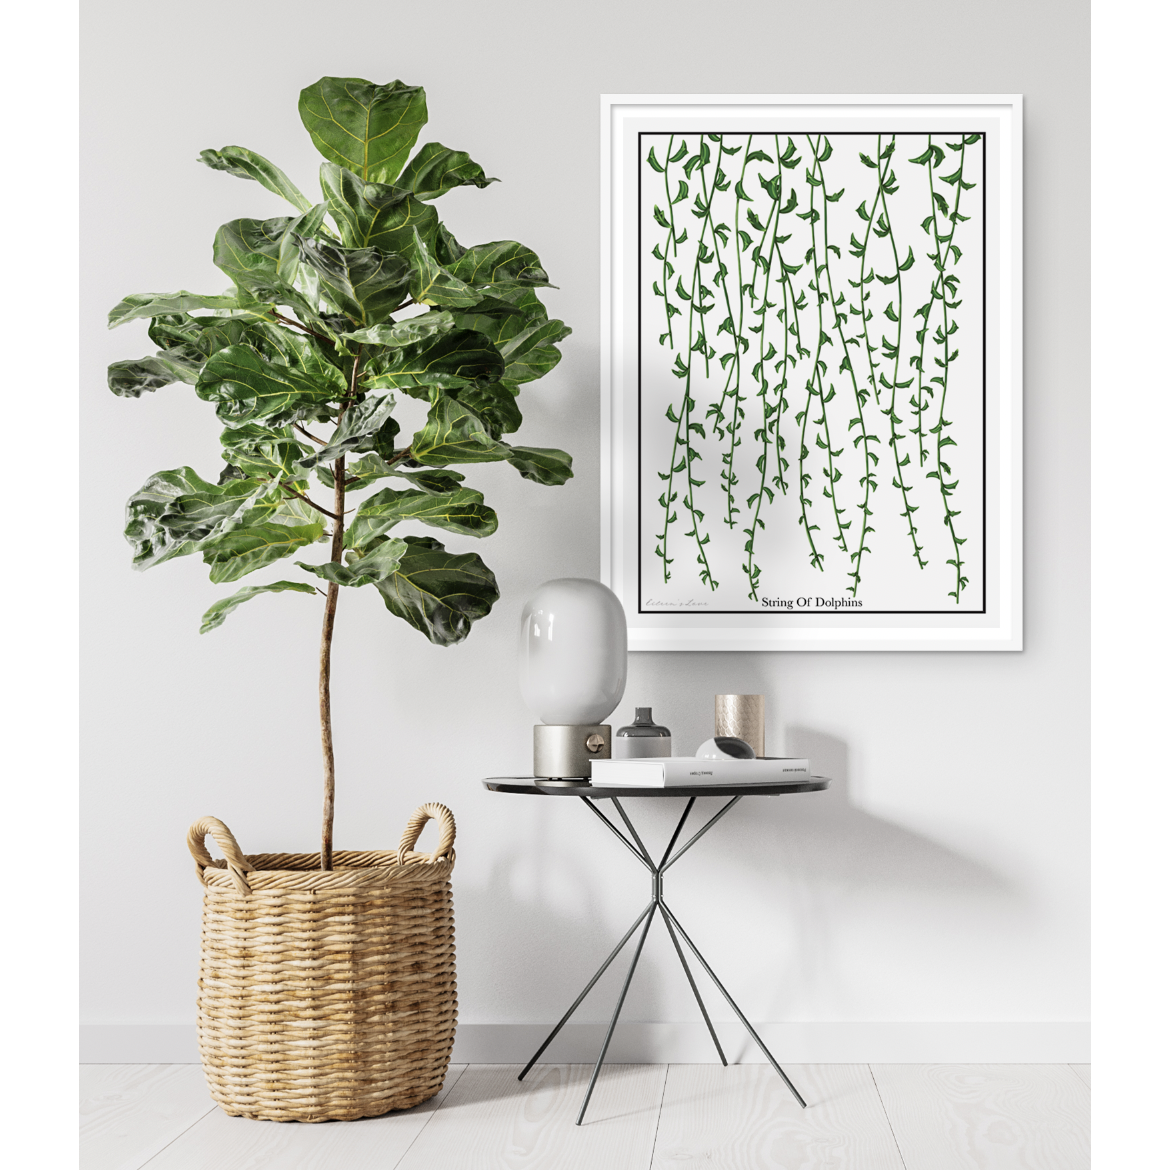 String Of Dolphins - Luxe Foliage